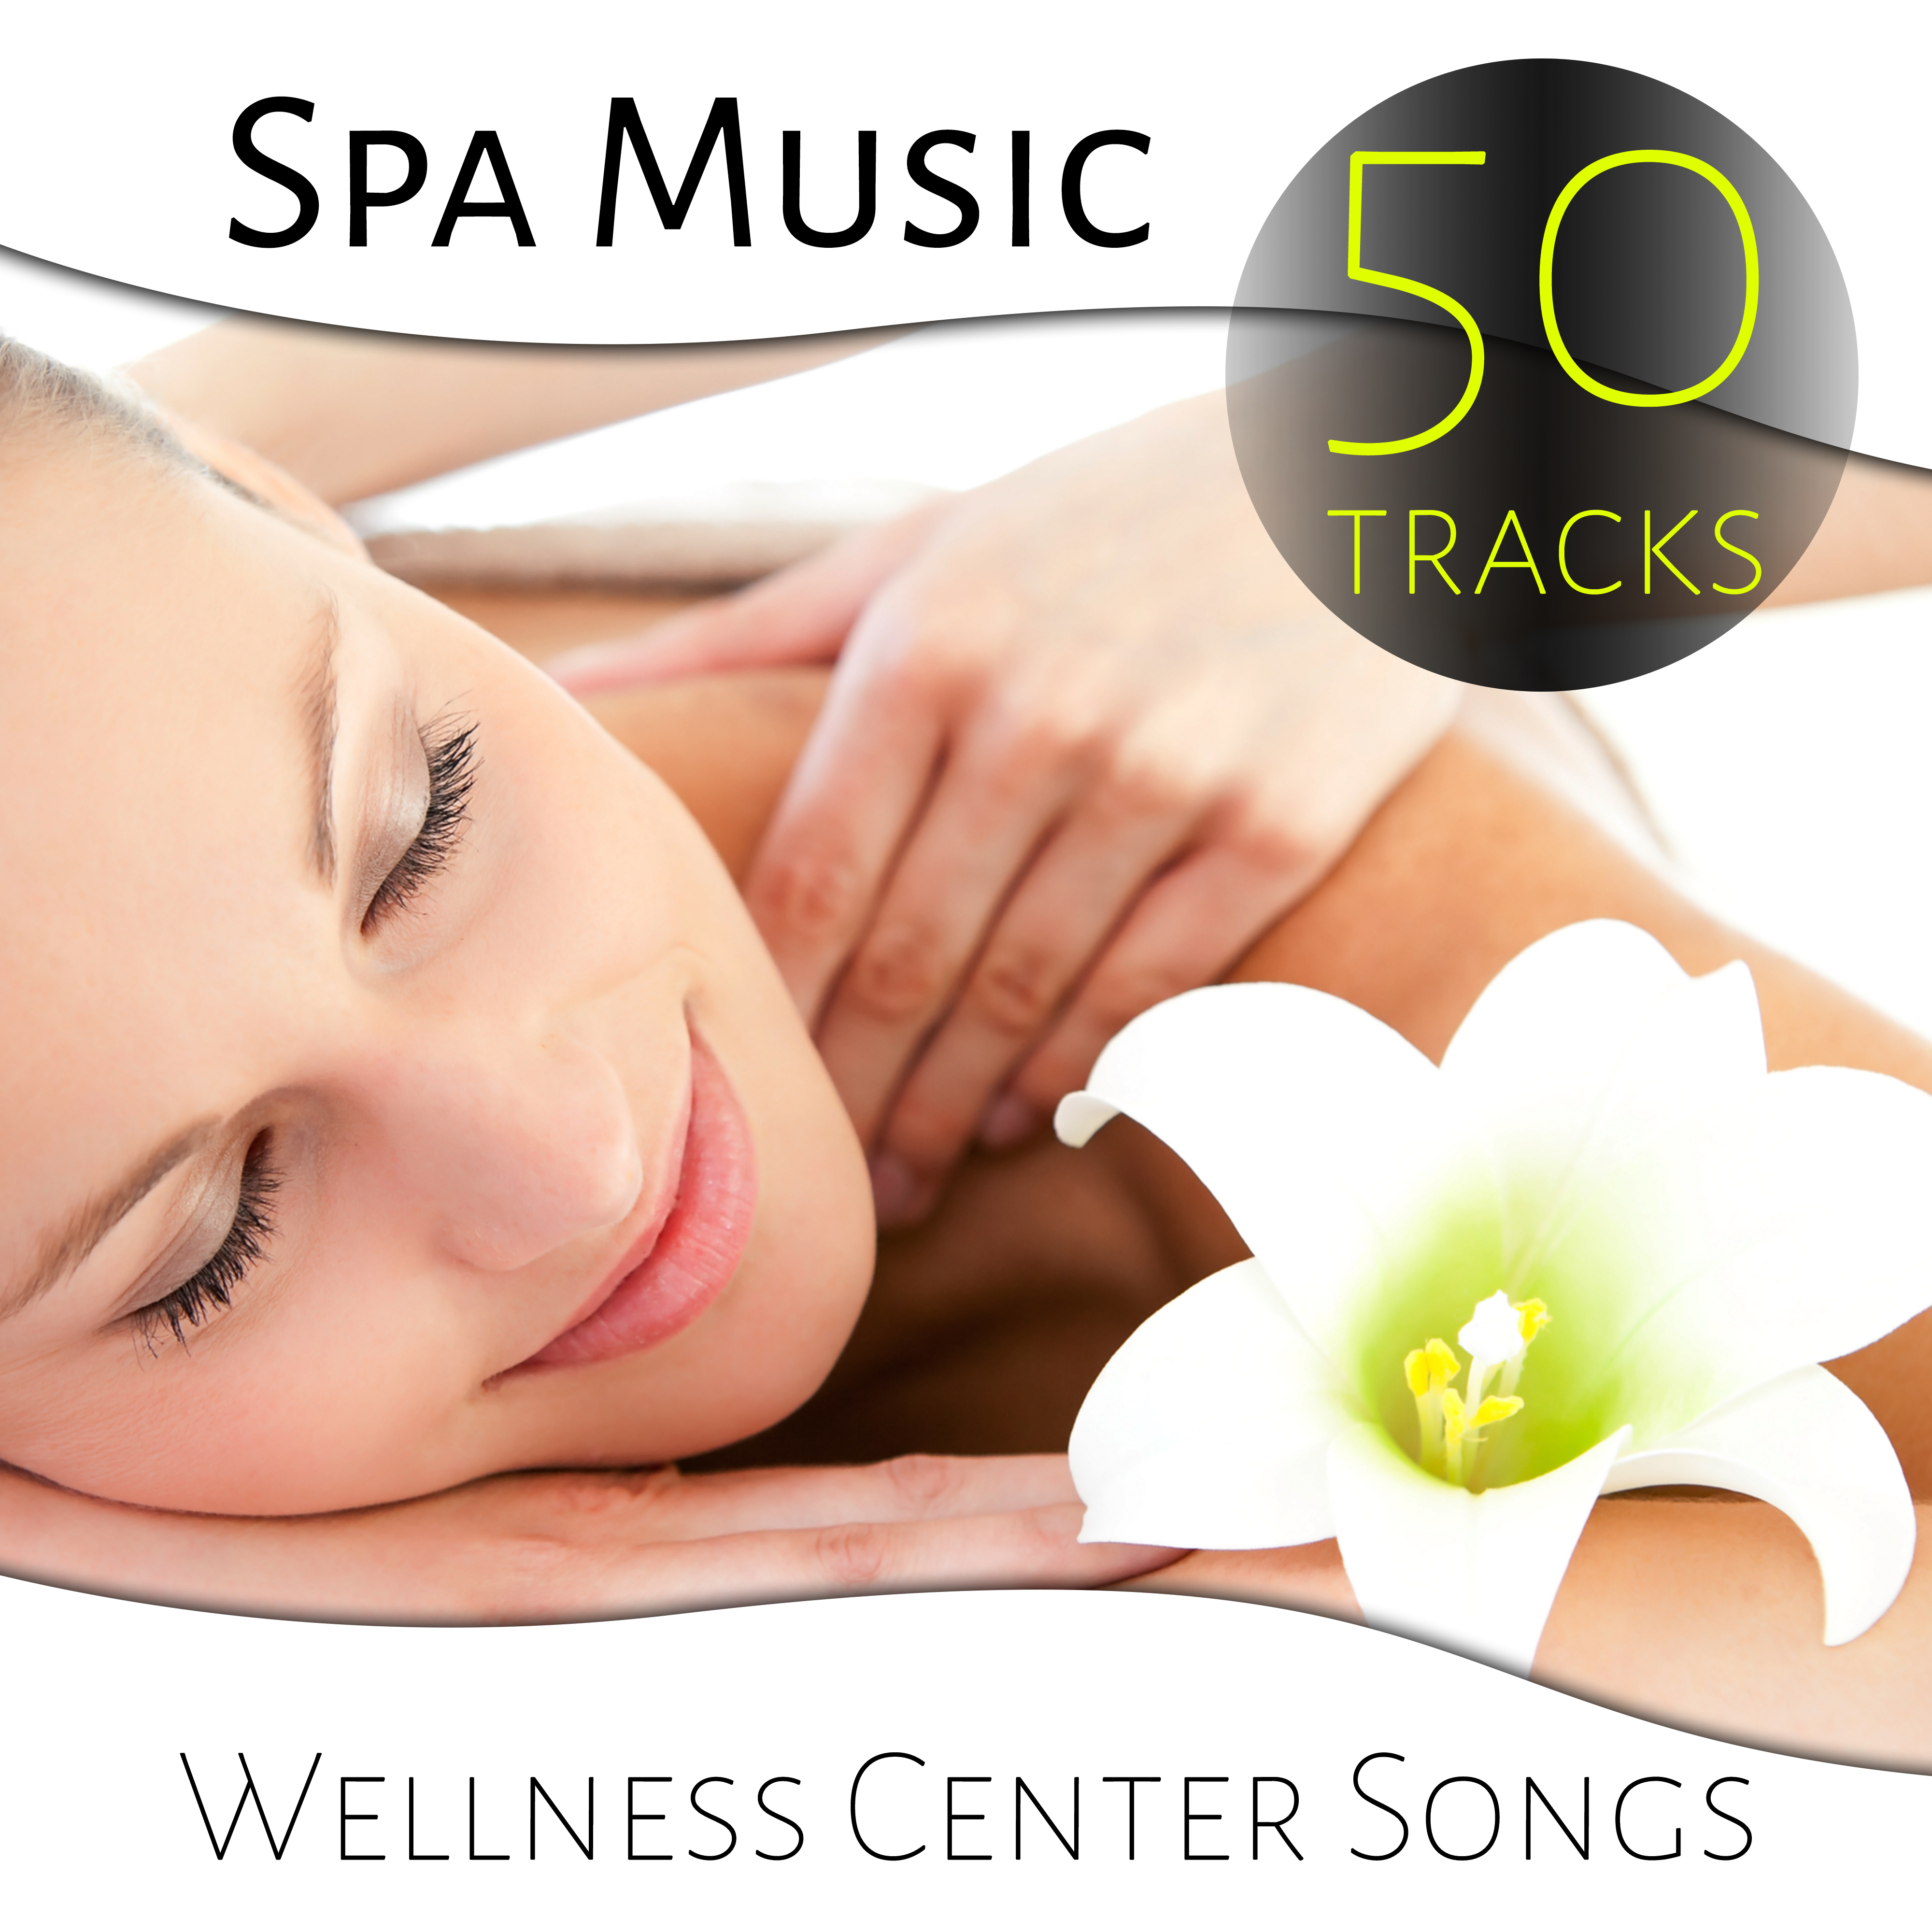 Sleep Relaxing Songs for Spa Massage